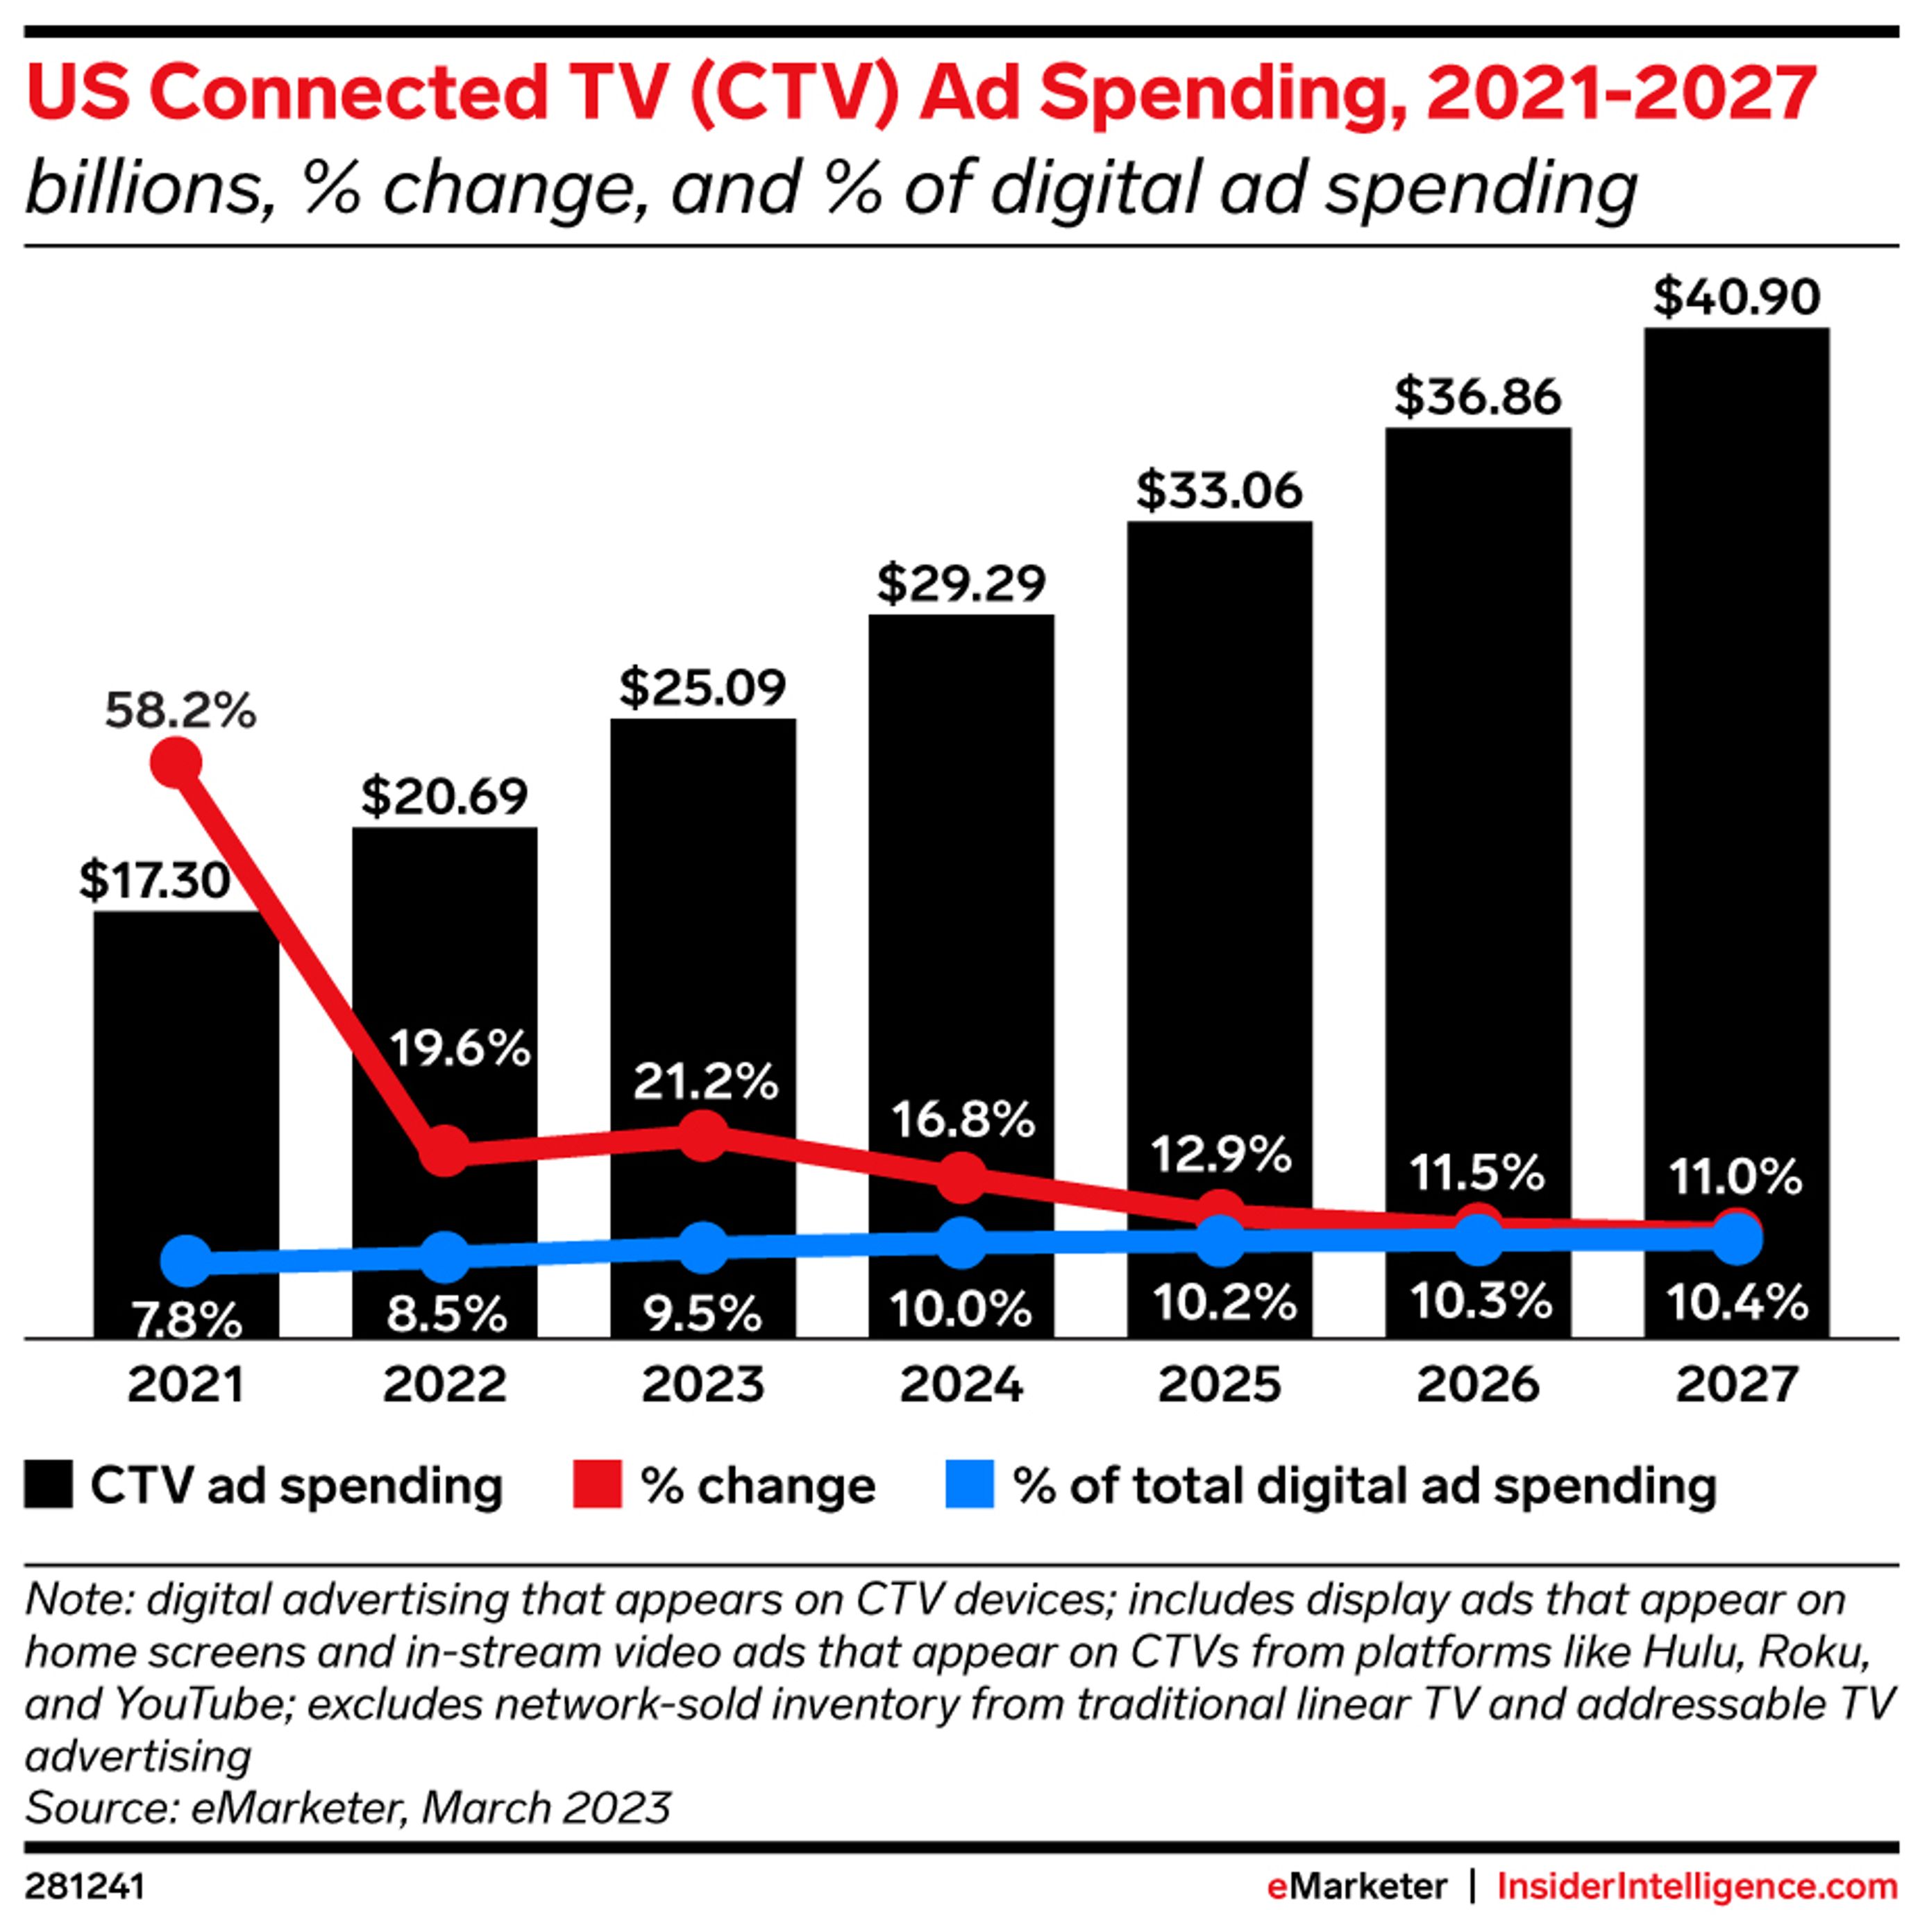 US TV and Connected TV ad spending, 2021-2027